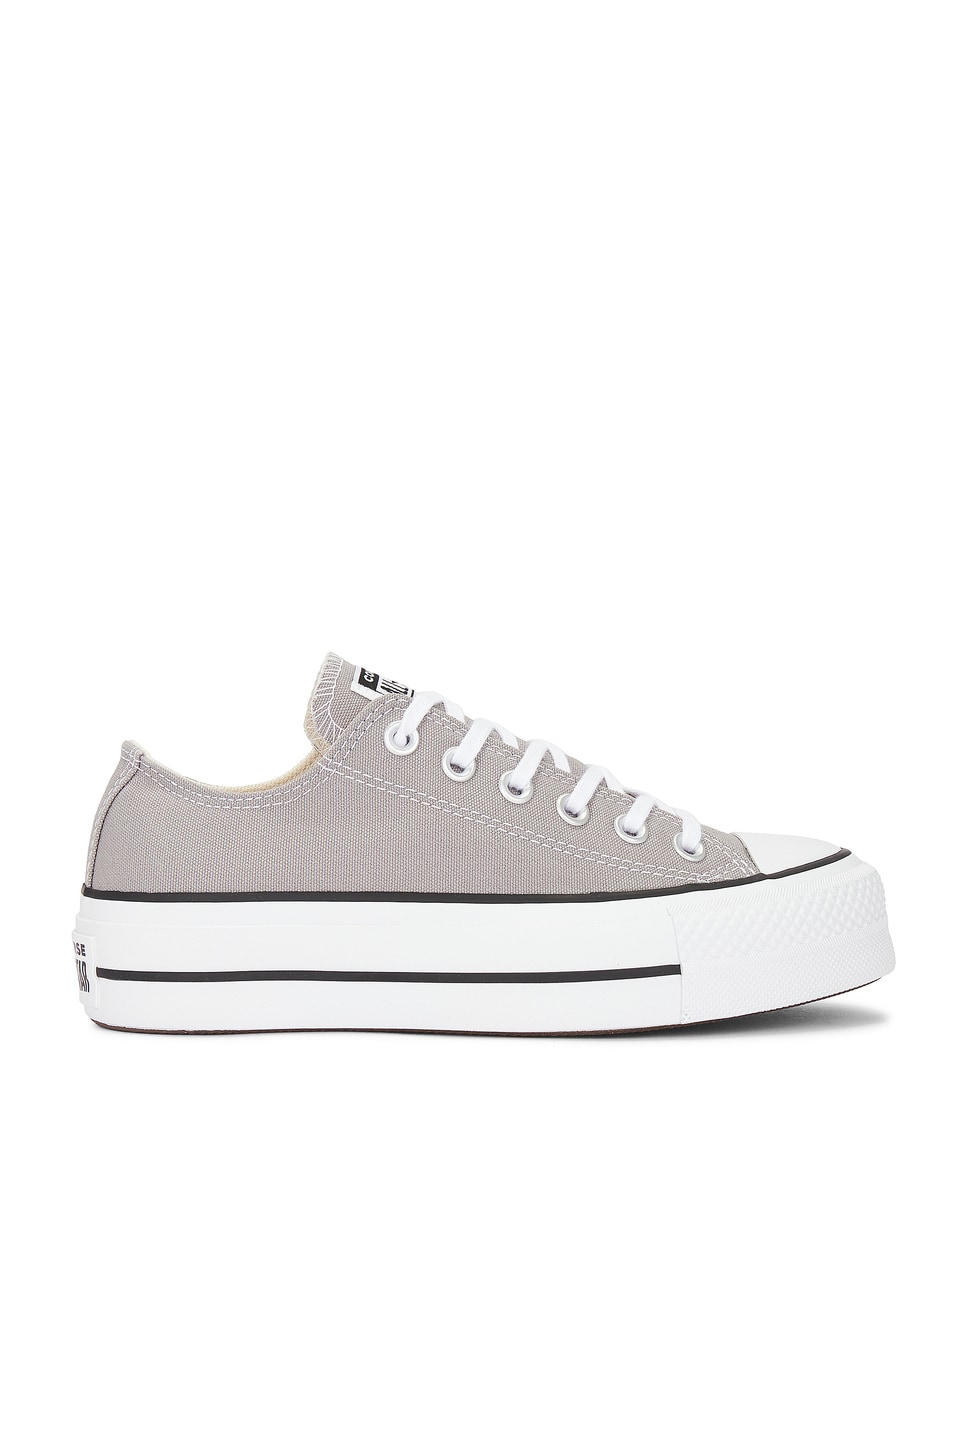 Image 1 of Converse Chuck Taylor All Star Lift in Totally Neutral, White, & Black